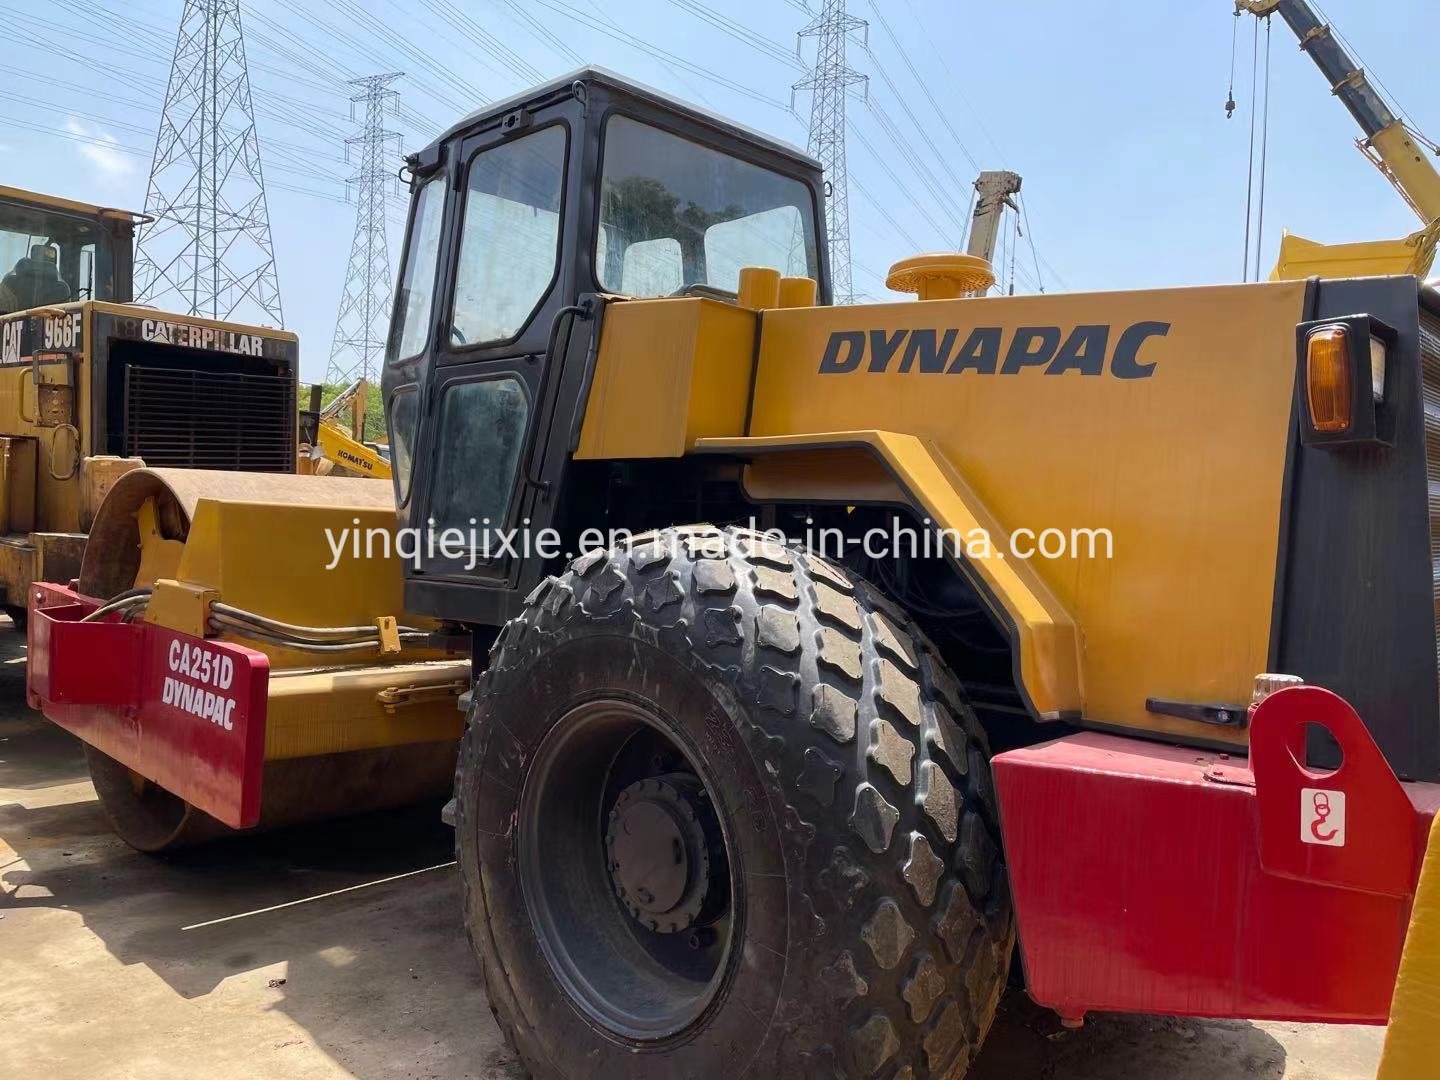 Used Compactor Dynapac Ca30d Road Roller, Static Roller Dynapac, Bomag Vibratory Roller Ca25, Ca30